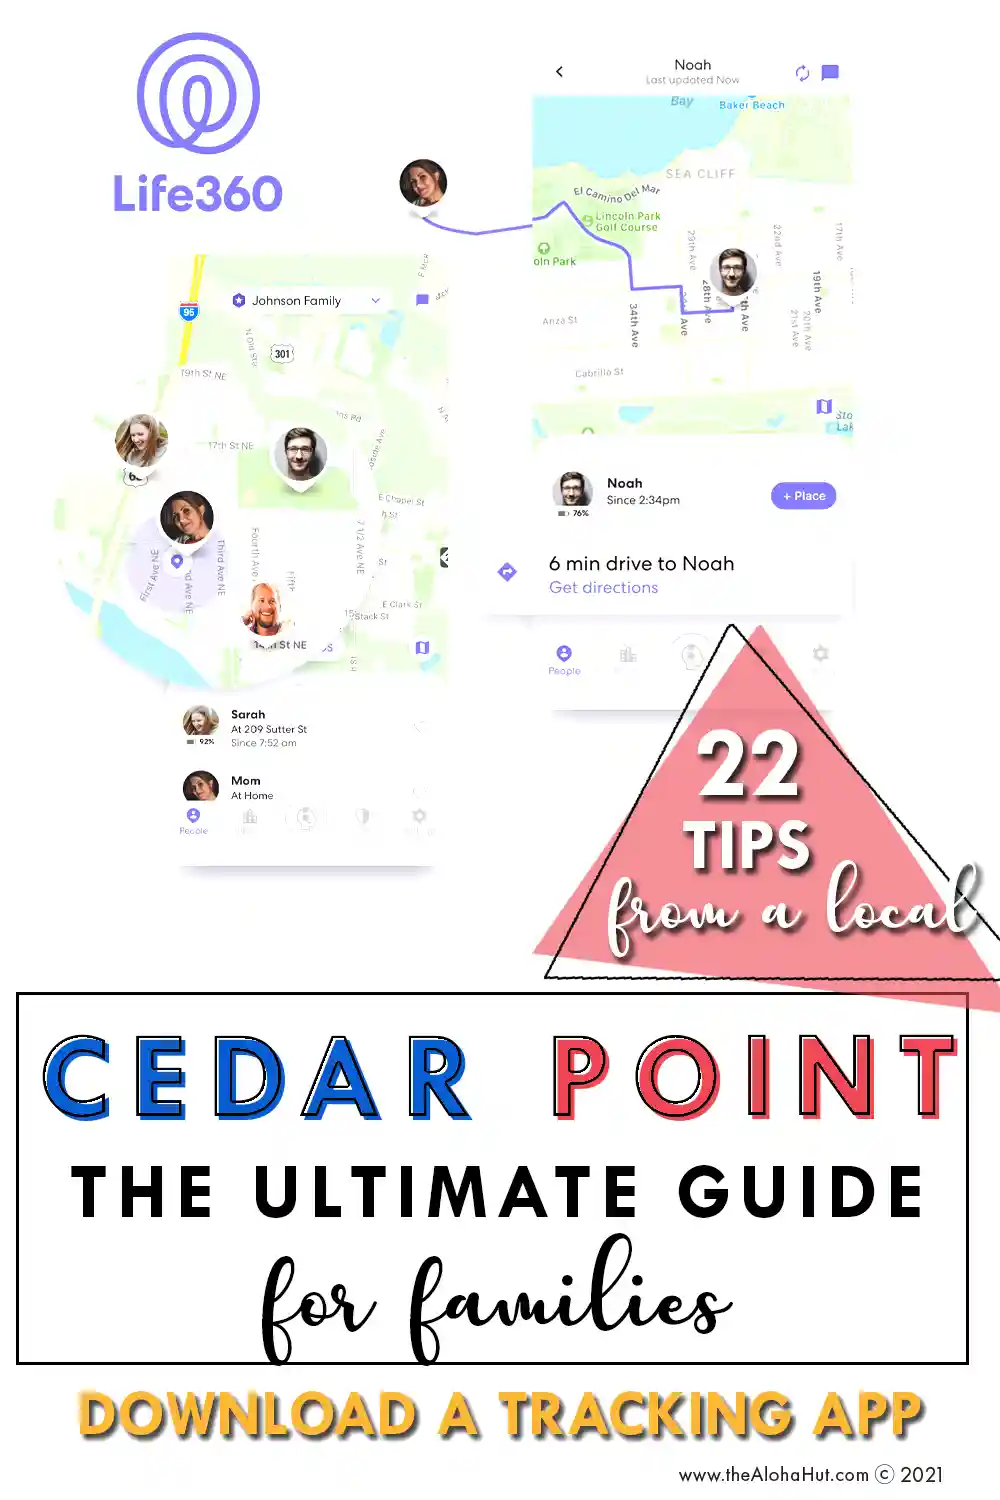 Cedar Point the Ultimate Guide for Families - Tips & Tricks